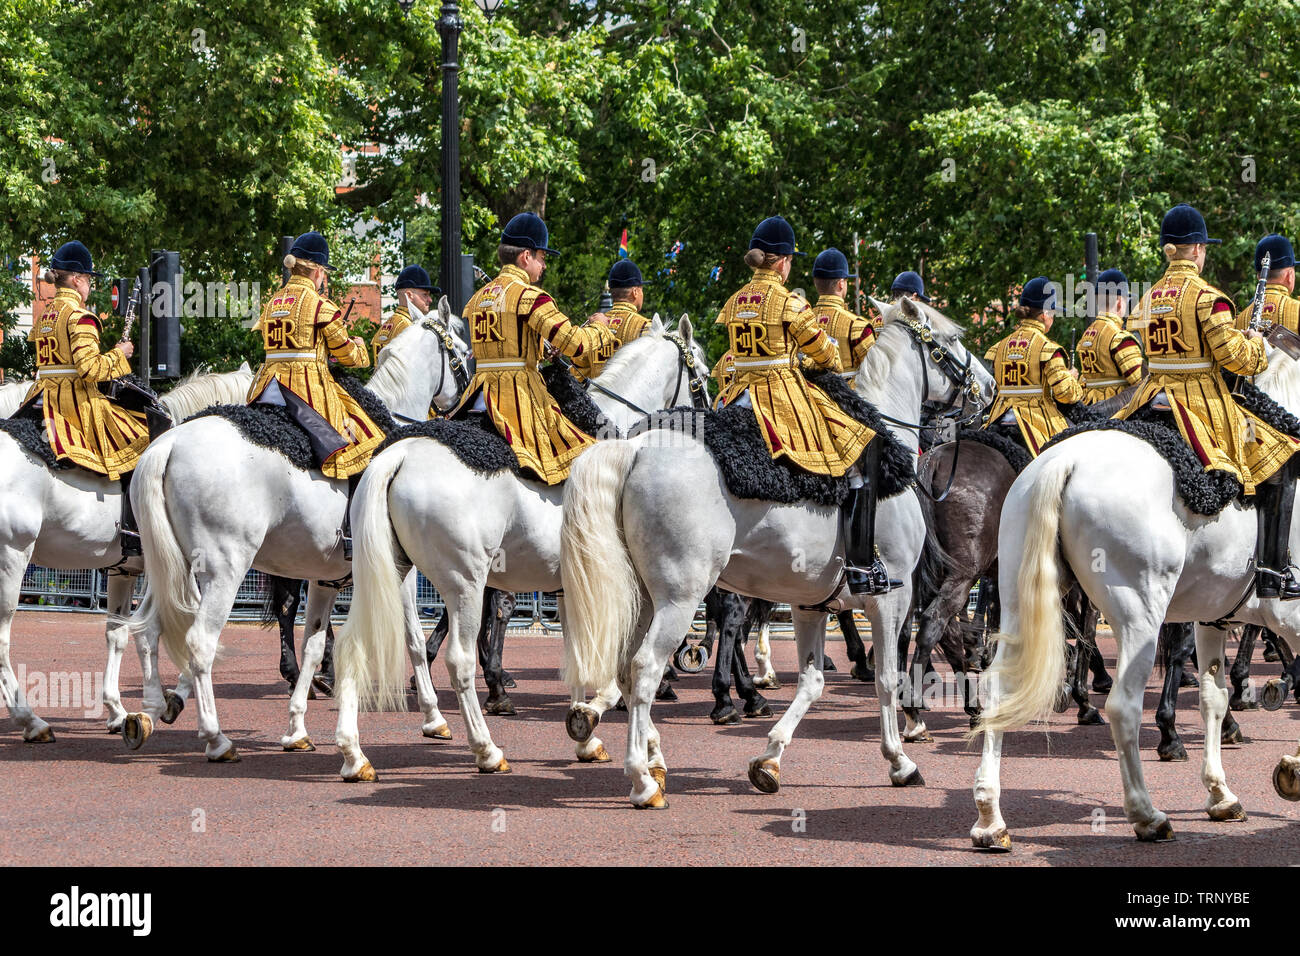 White horses of the Mounted Band of The Household Cavalry on The Mall at The Trooping The Colour Ceremony ,London, UK,2019 Stock Photo